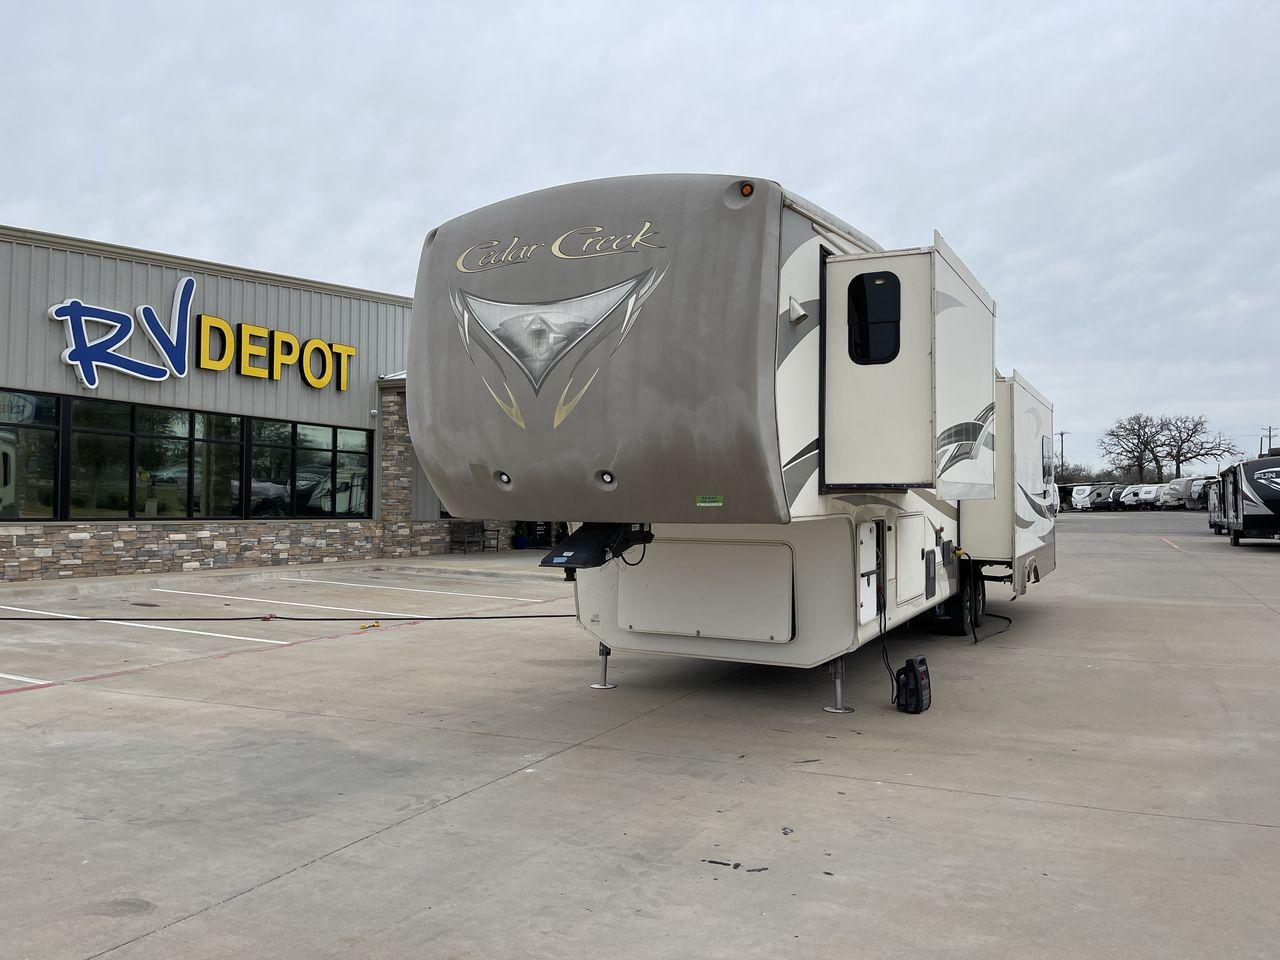 2014 TAN FOREST RIVER CEDAR CREEK 36CKTS (4X4FCRM26ES) , Length: 39.92 ft. | Dry Weight: 12,076 lbs. | Gross Weight: 16,389 lbs. | Slides: 3 transmission, located at 4319 N Main Street, Cleburne, TX, 76033, (817) 221-0660, 32.435829, -97.384178 - This 2014 Forest River Cedar Creek 36CKTS Fifth Wheel measures just shy of 40 feet long and 8 feet wide. This model has a GVWR of 16,389 and a hitch weight of 2,389 lbs. This unit is equipped with heating rated at 40,000 BTUs, and cooling rated at 15,000 BTUs, meaning it will always be exactly the t - Photo #0